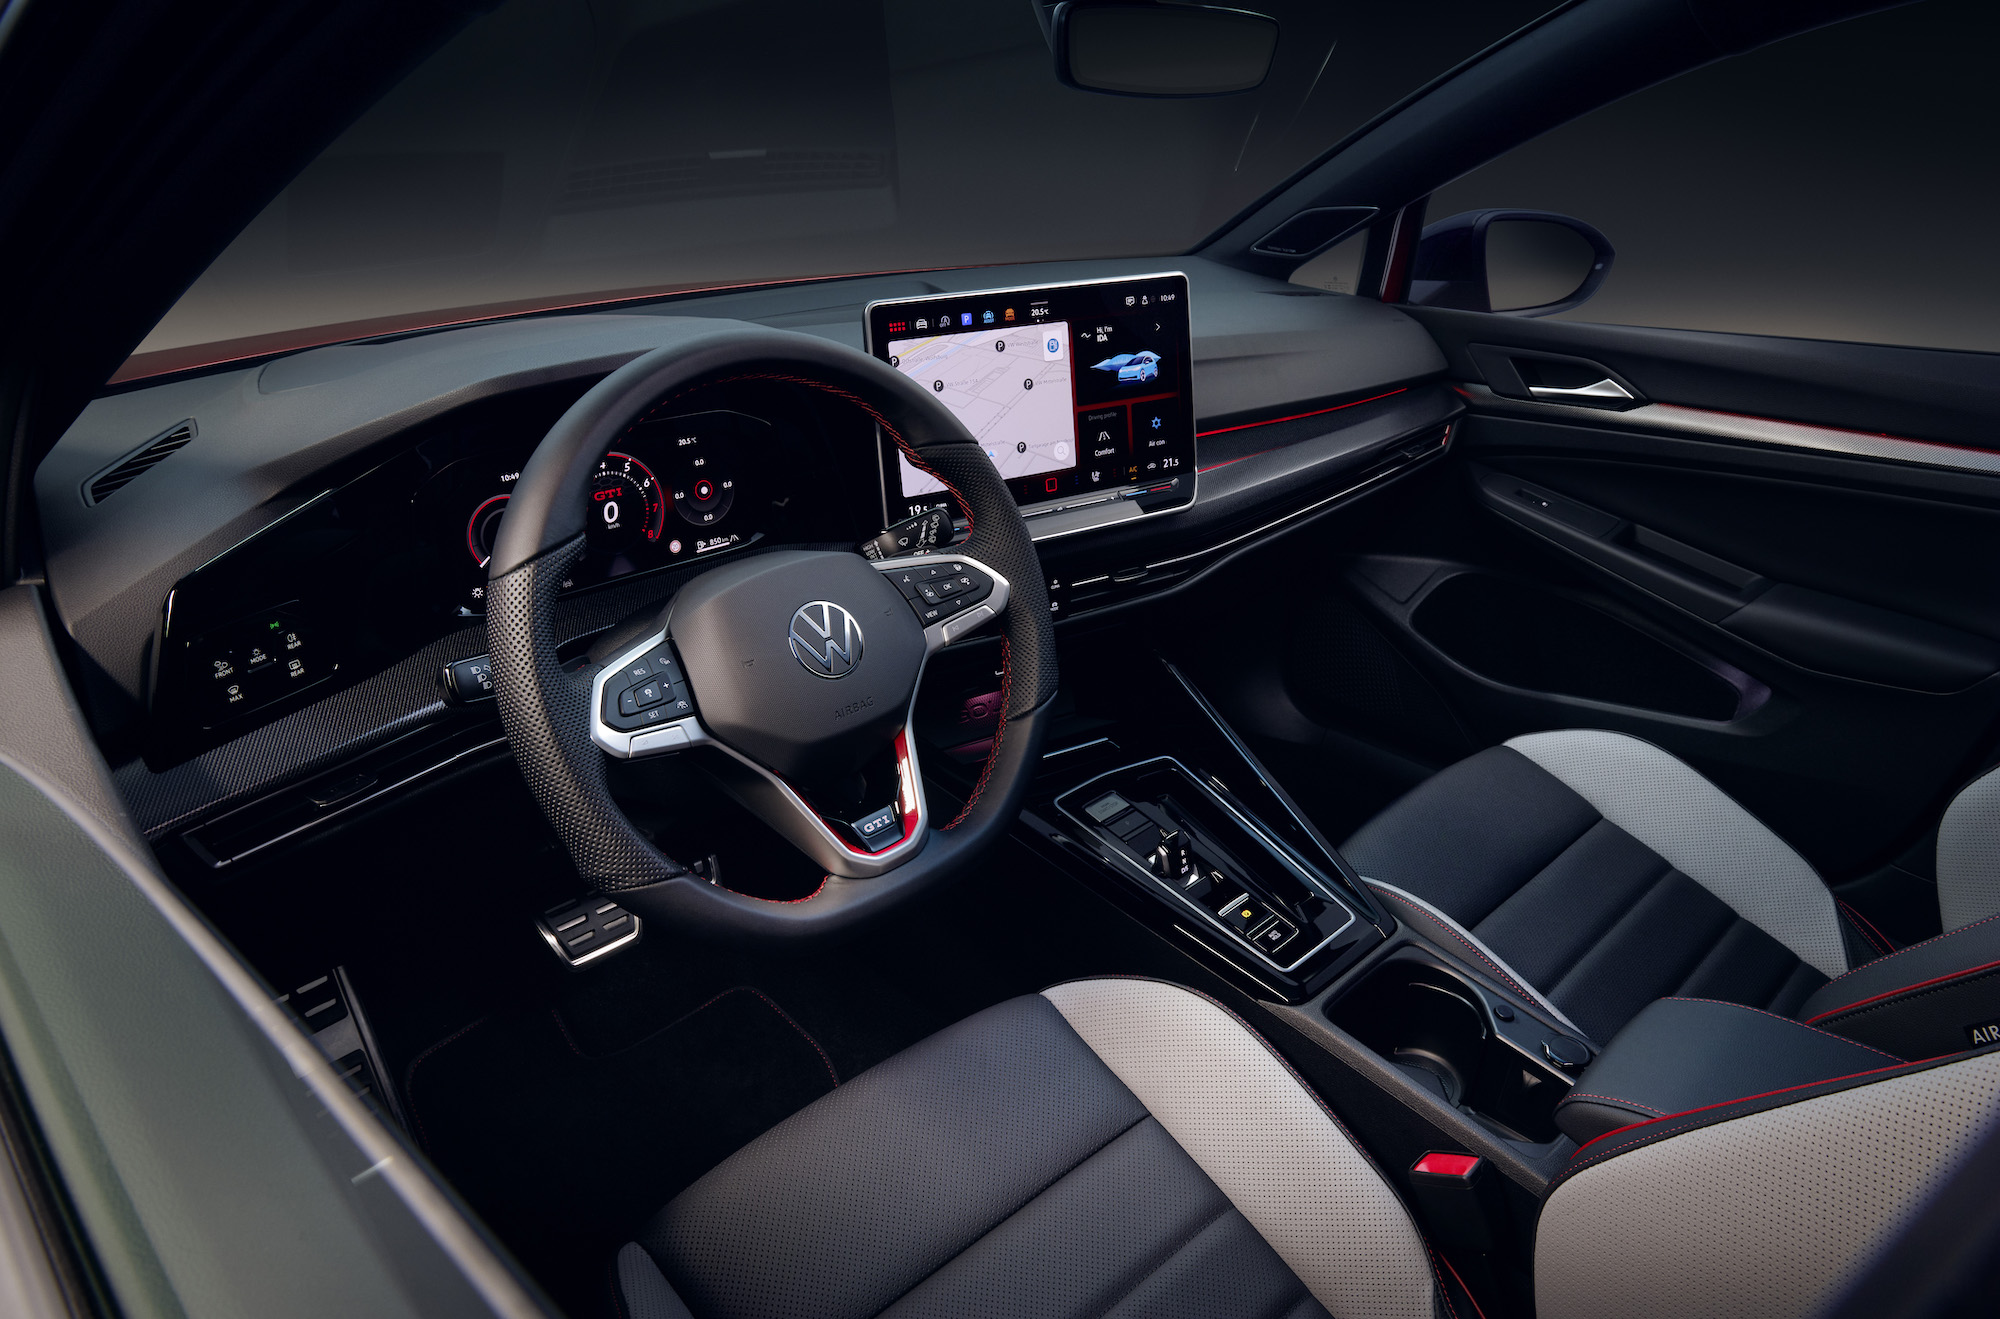 An image showing the interior of a new Volkswagen Gold, including the steering wheel and touchscreen.